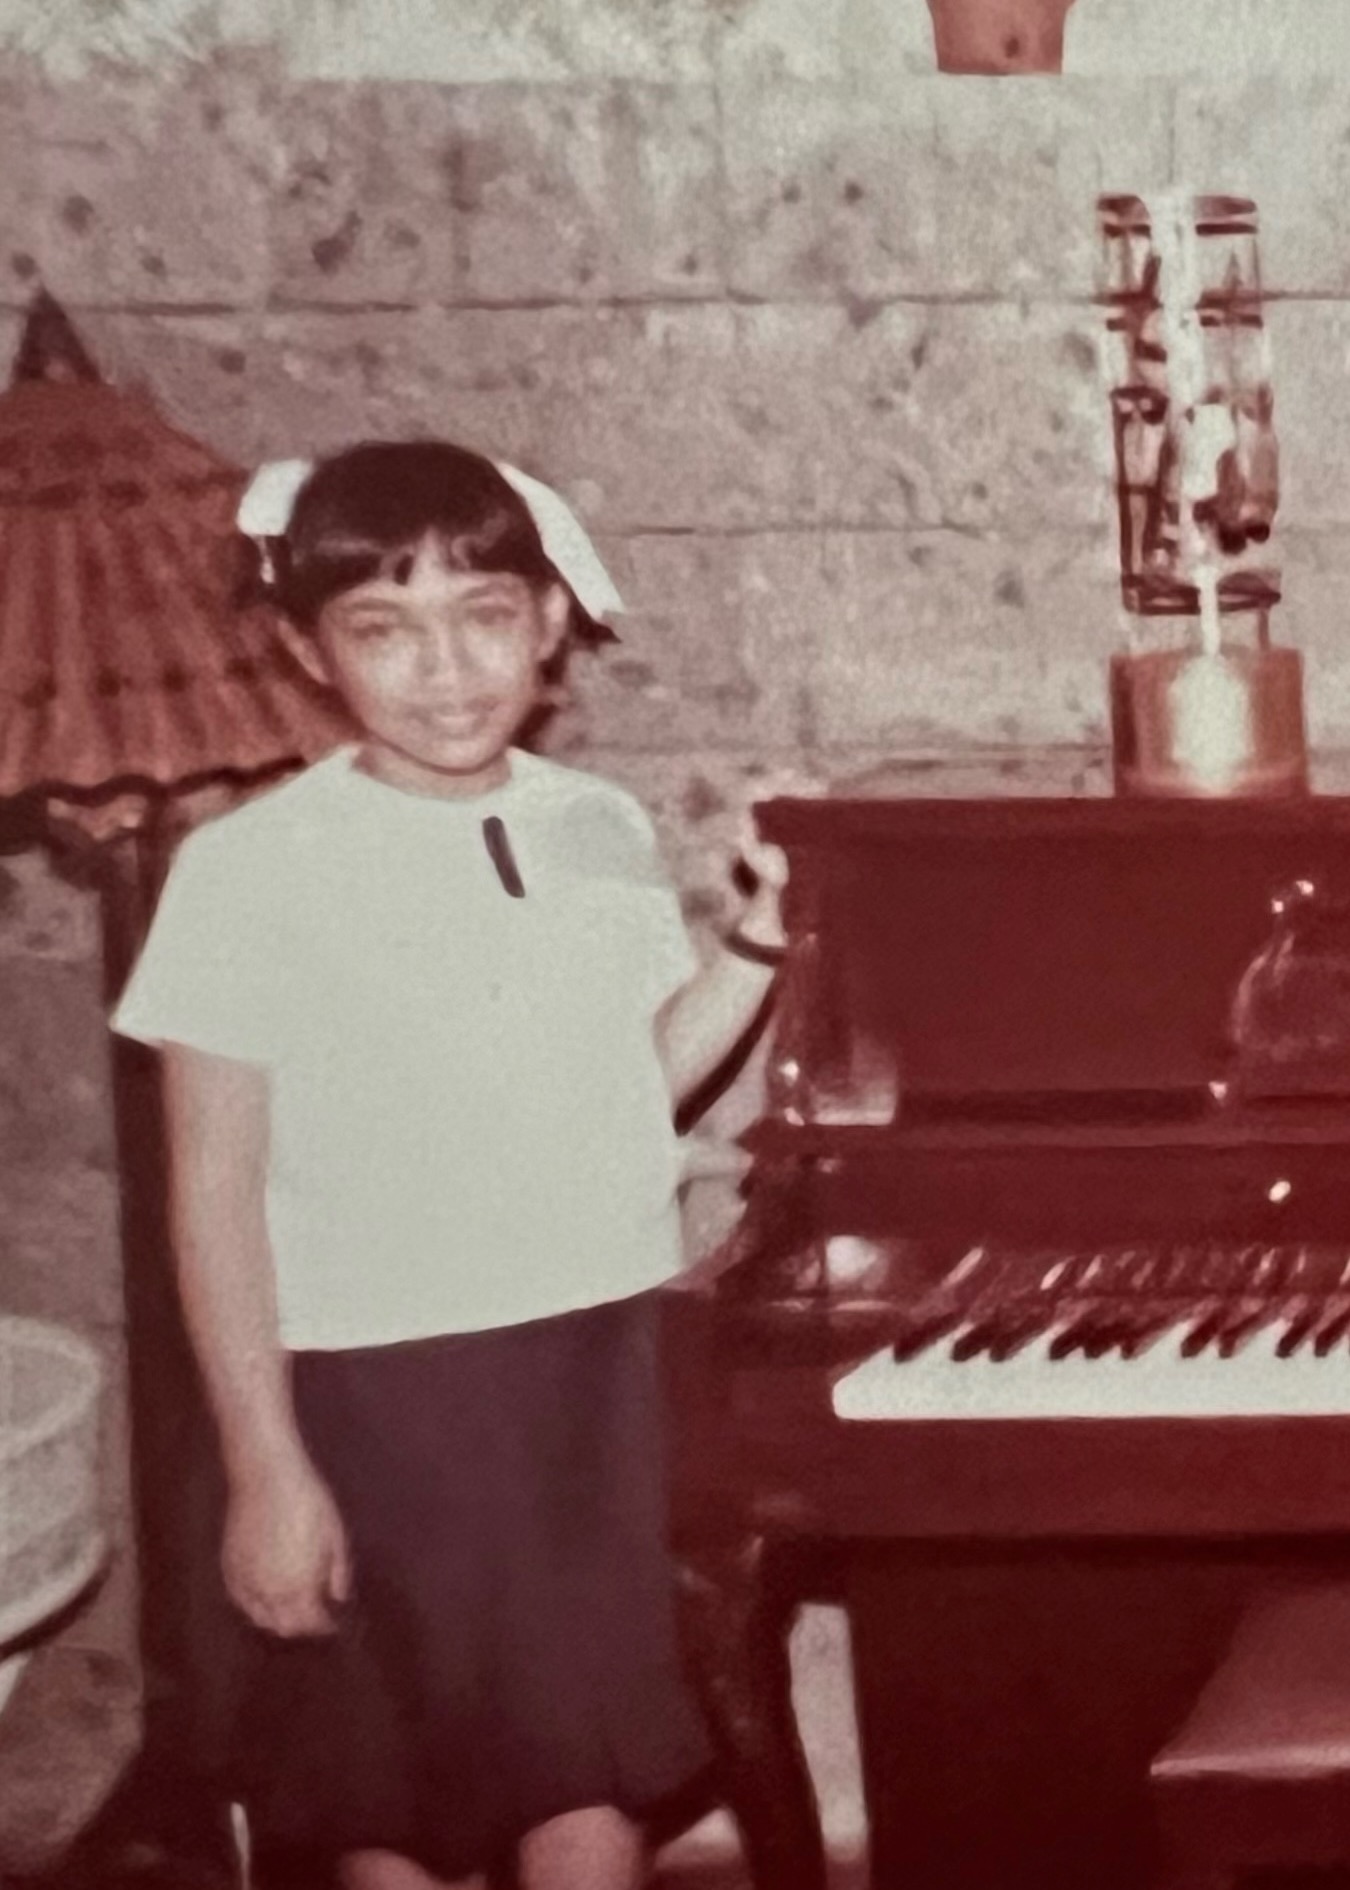 A sepia-tone image showing a young girl with a ribbon in her hair smiling next to a piano, one hand affectionately resting on the edge of the lid.